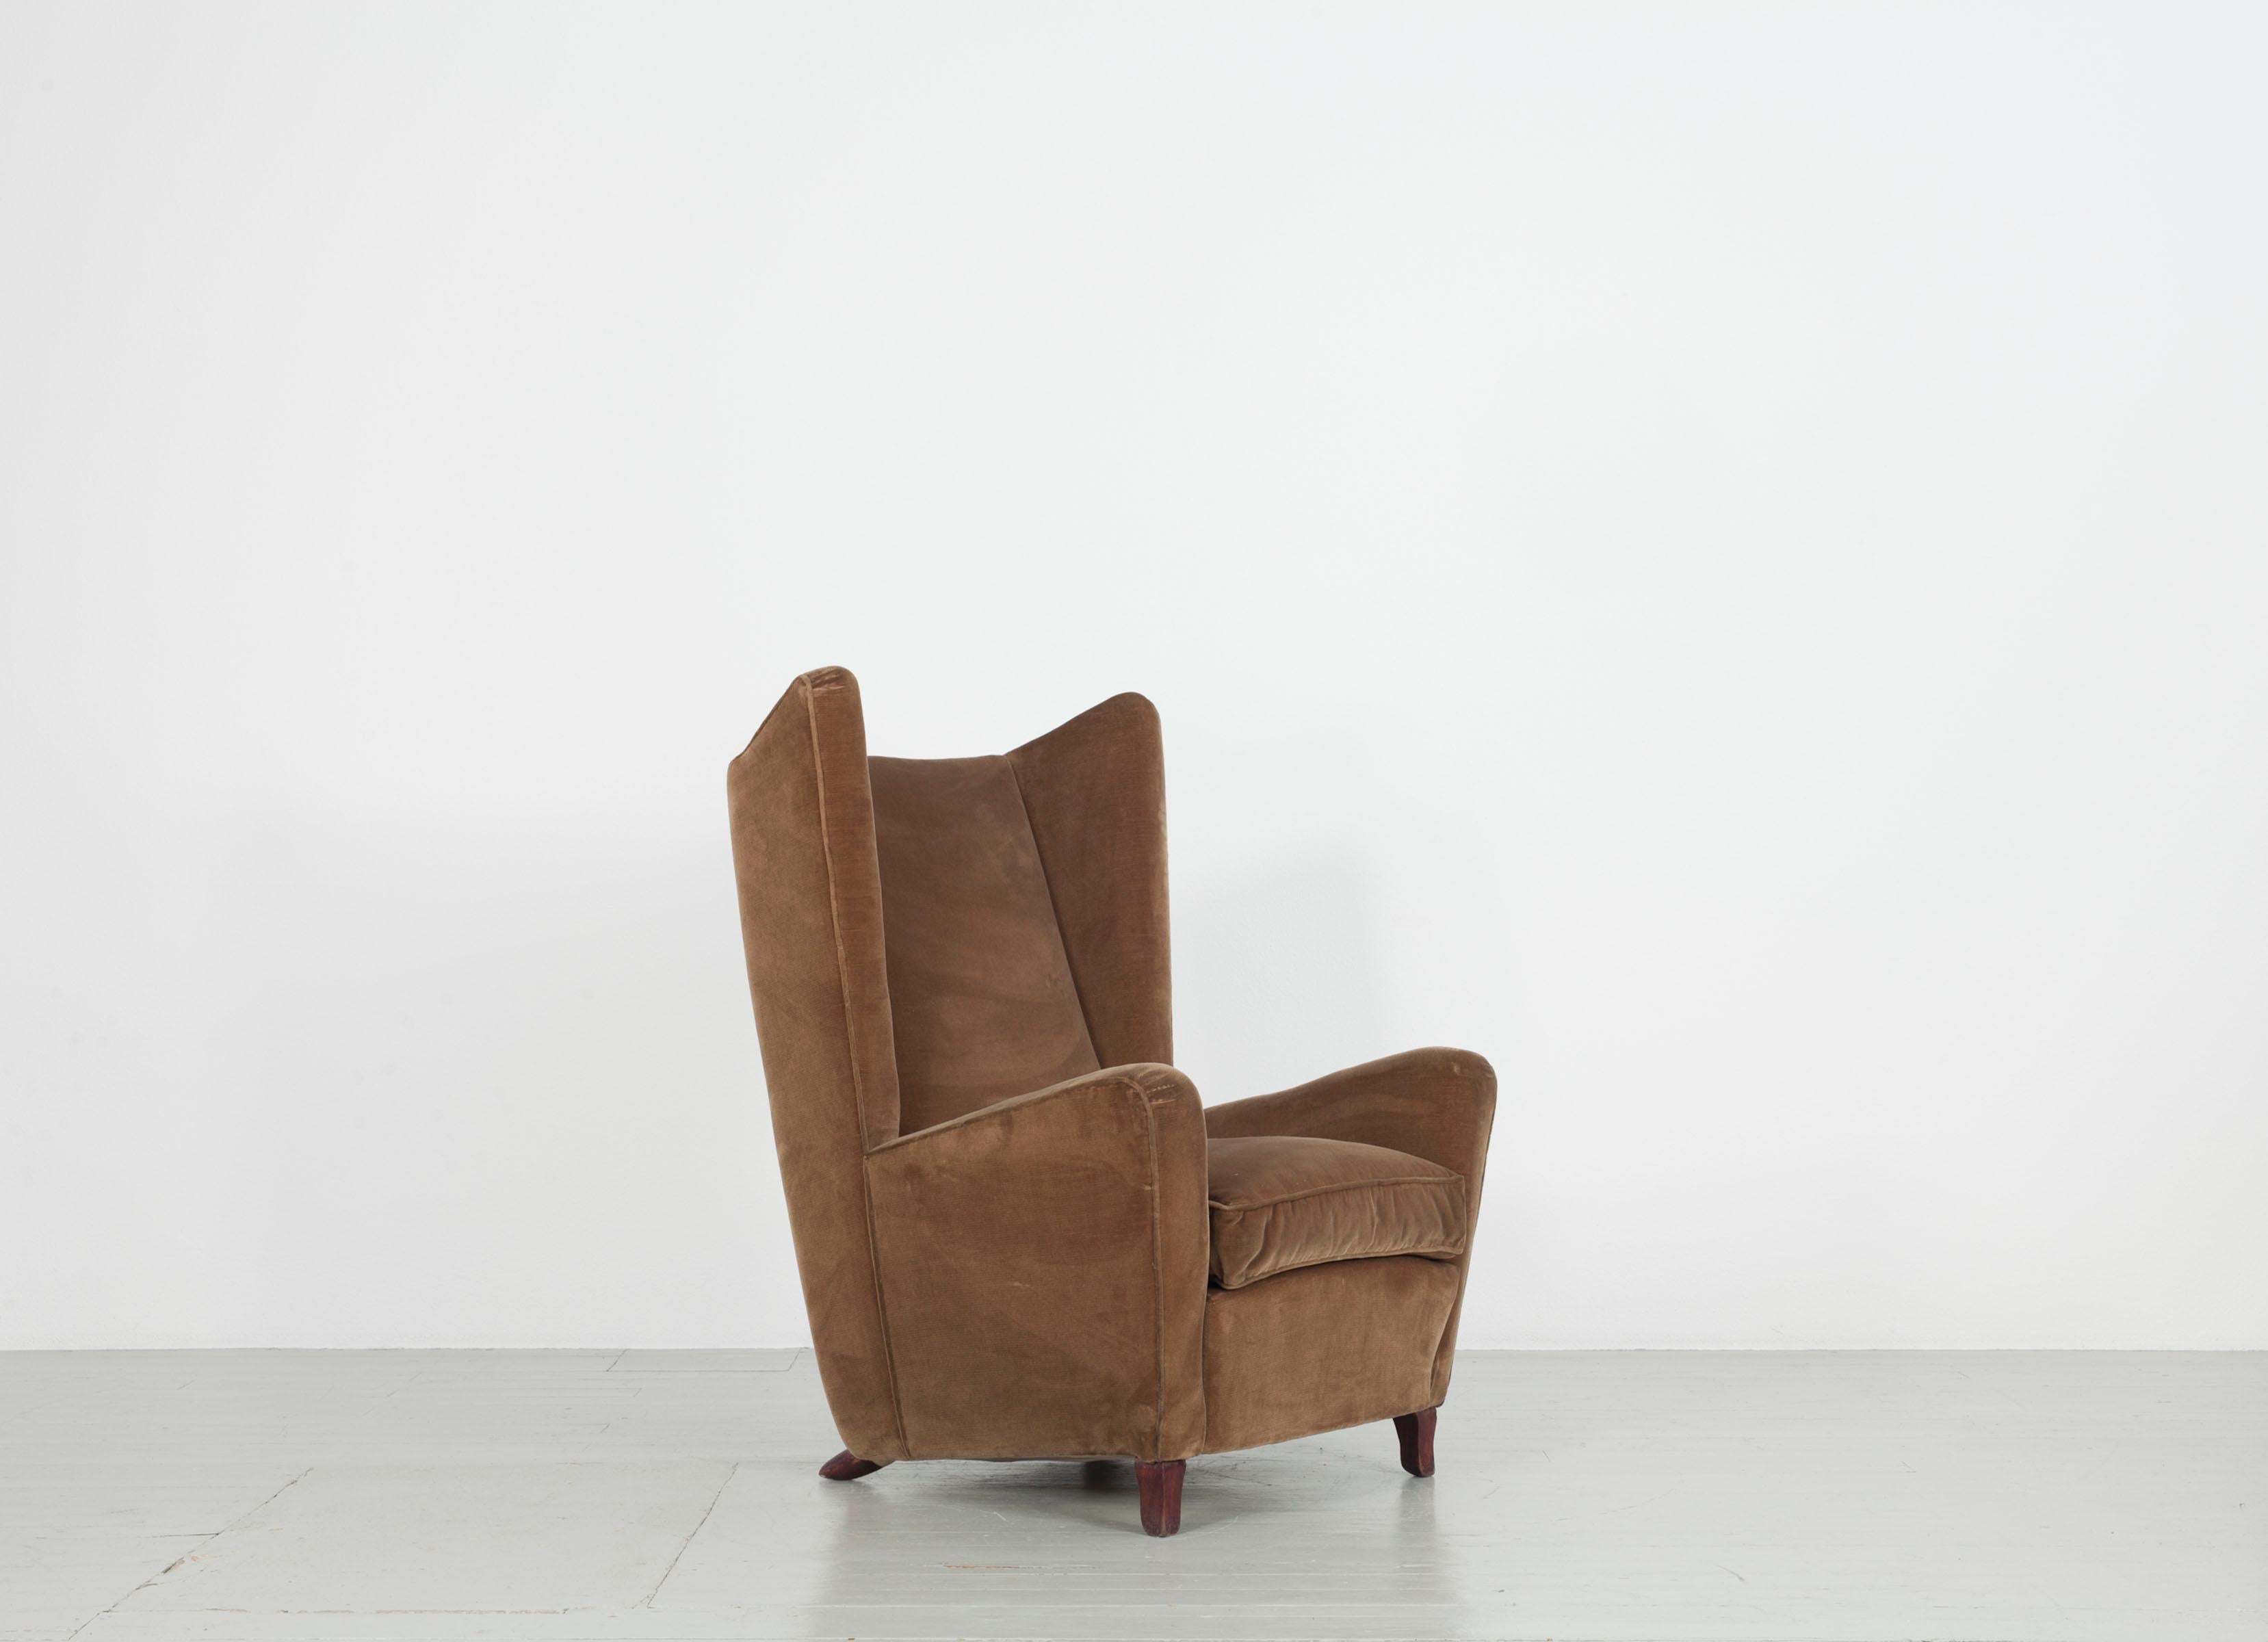 This set of three Italian armchairs was designed in the 1950s. The design is by Melchiorre Bega. What is special about the set is that all three chairs have a different design but still fit together very well. The furniture body is covered with